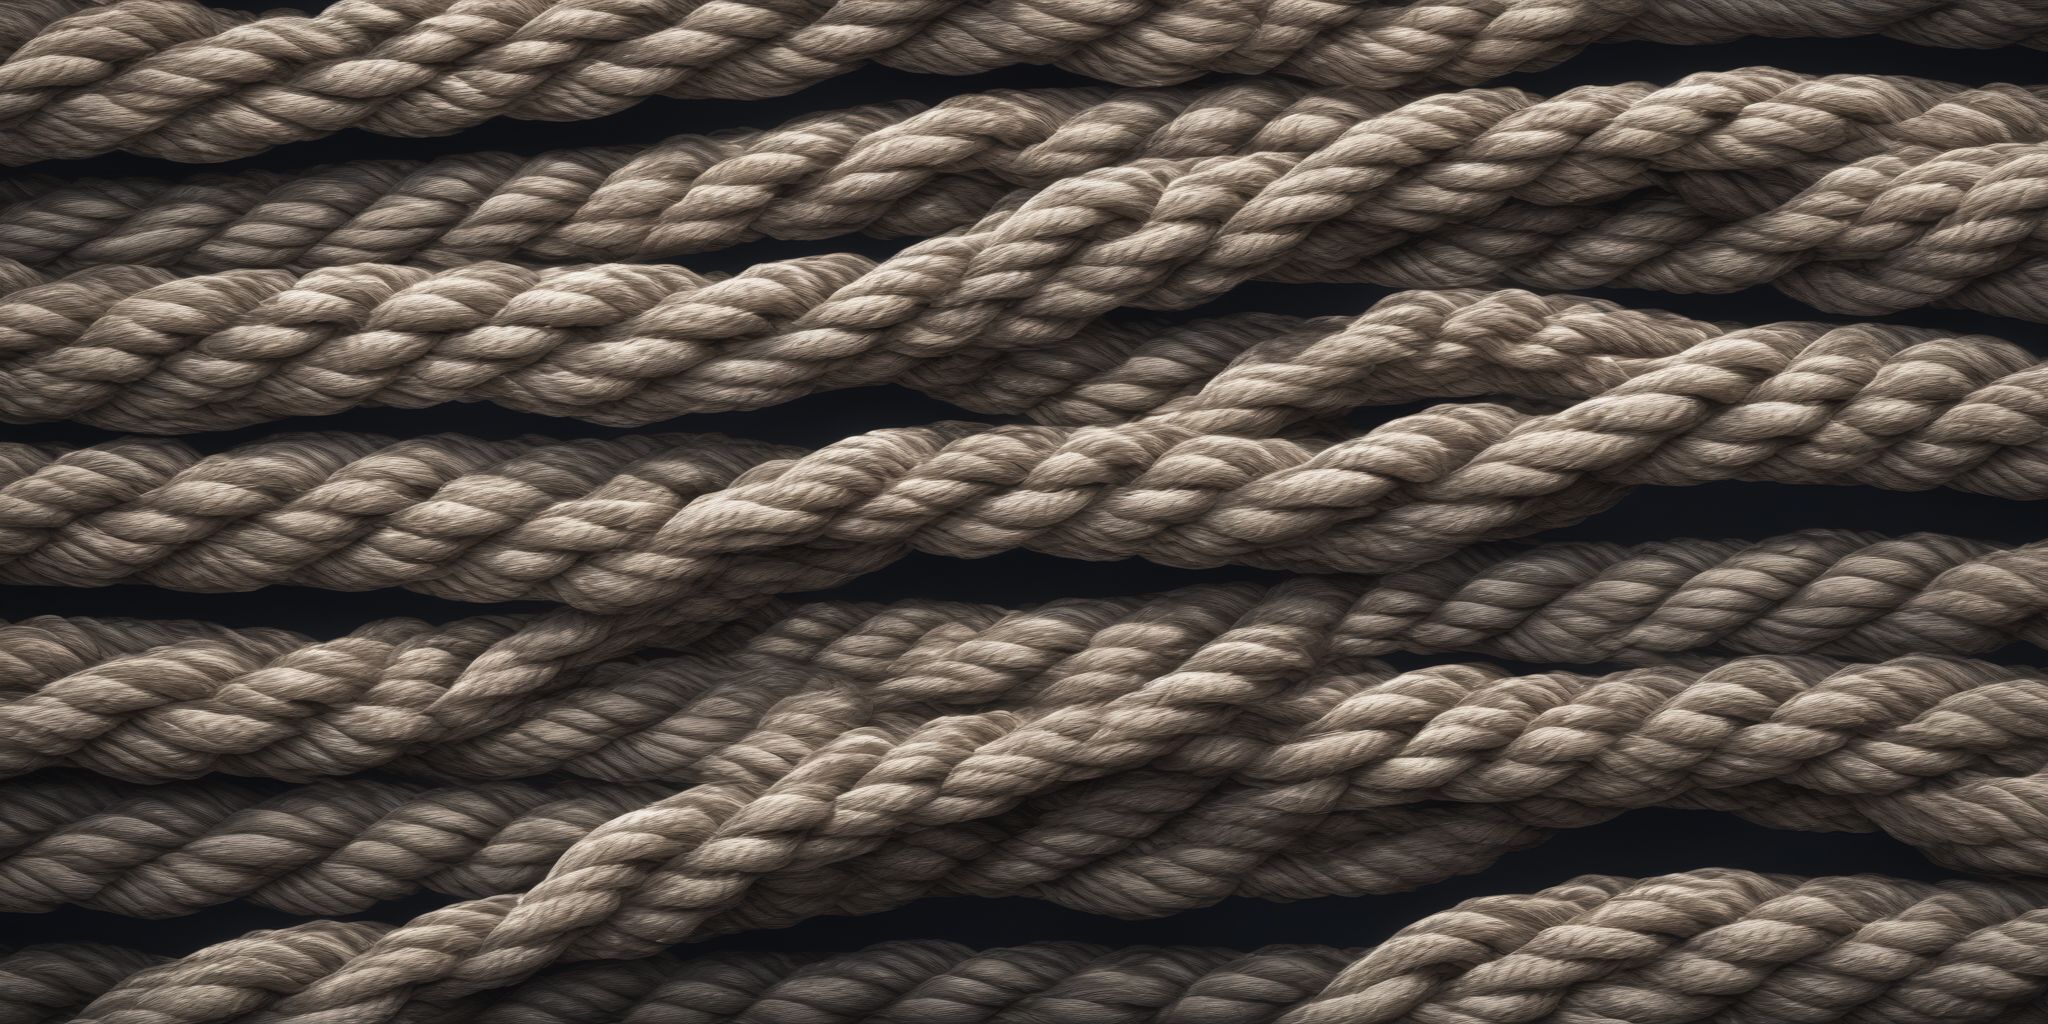 Rope  in realistic, photographic style